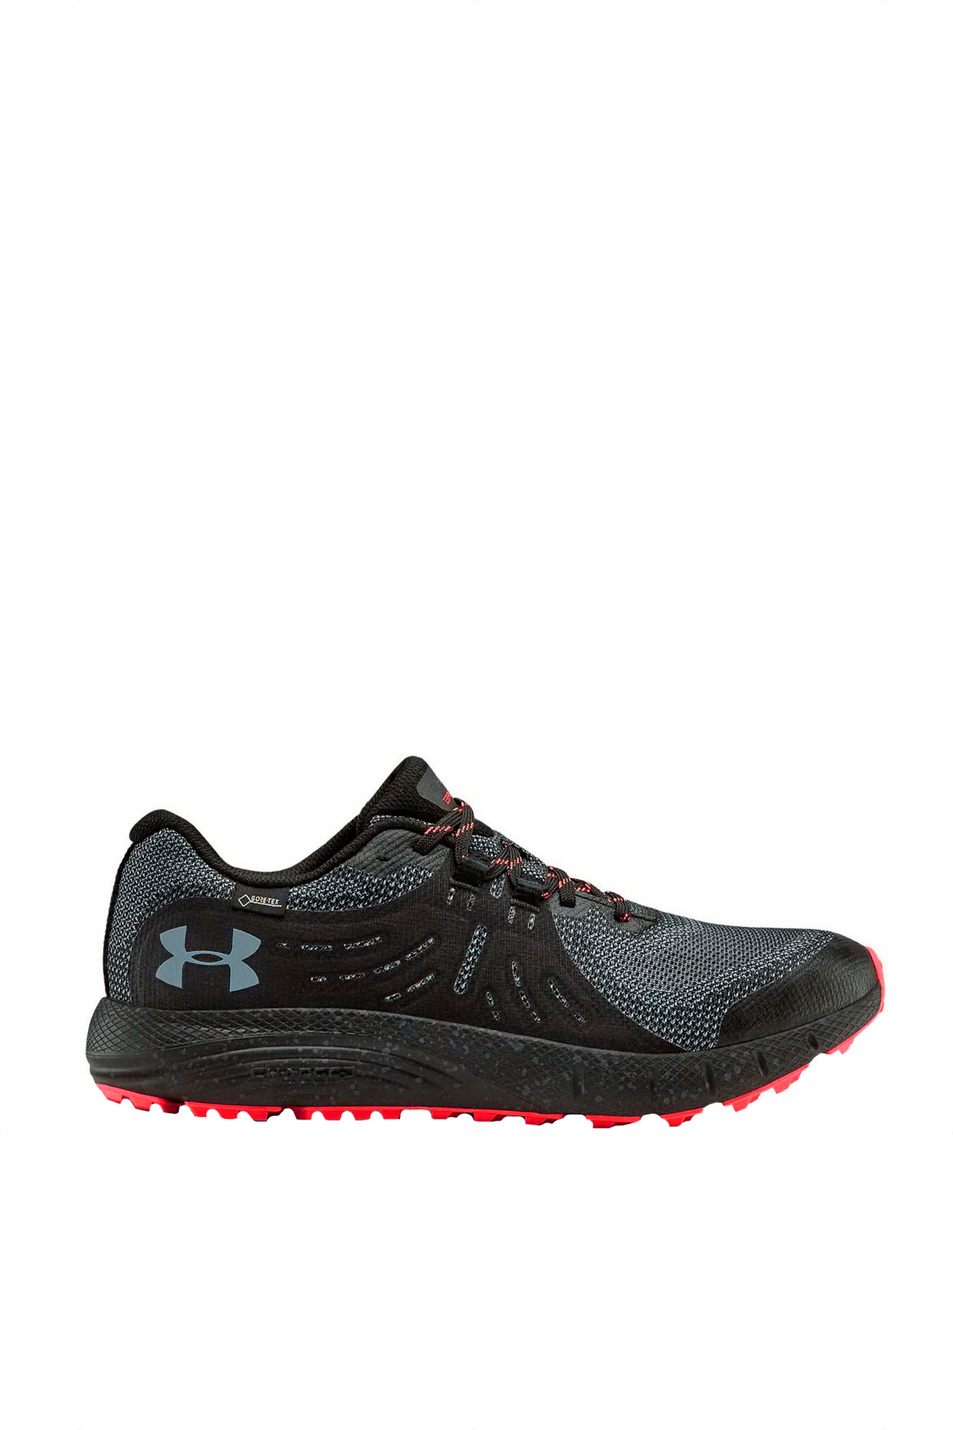 Under Armour Кроссовки Under Armour Charged Bandit Trail GORE-TEX (цвет ), артикул 3022784-001 | Фото 1